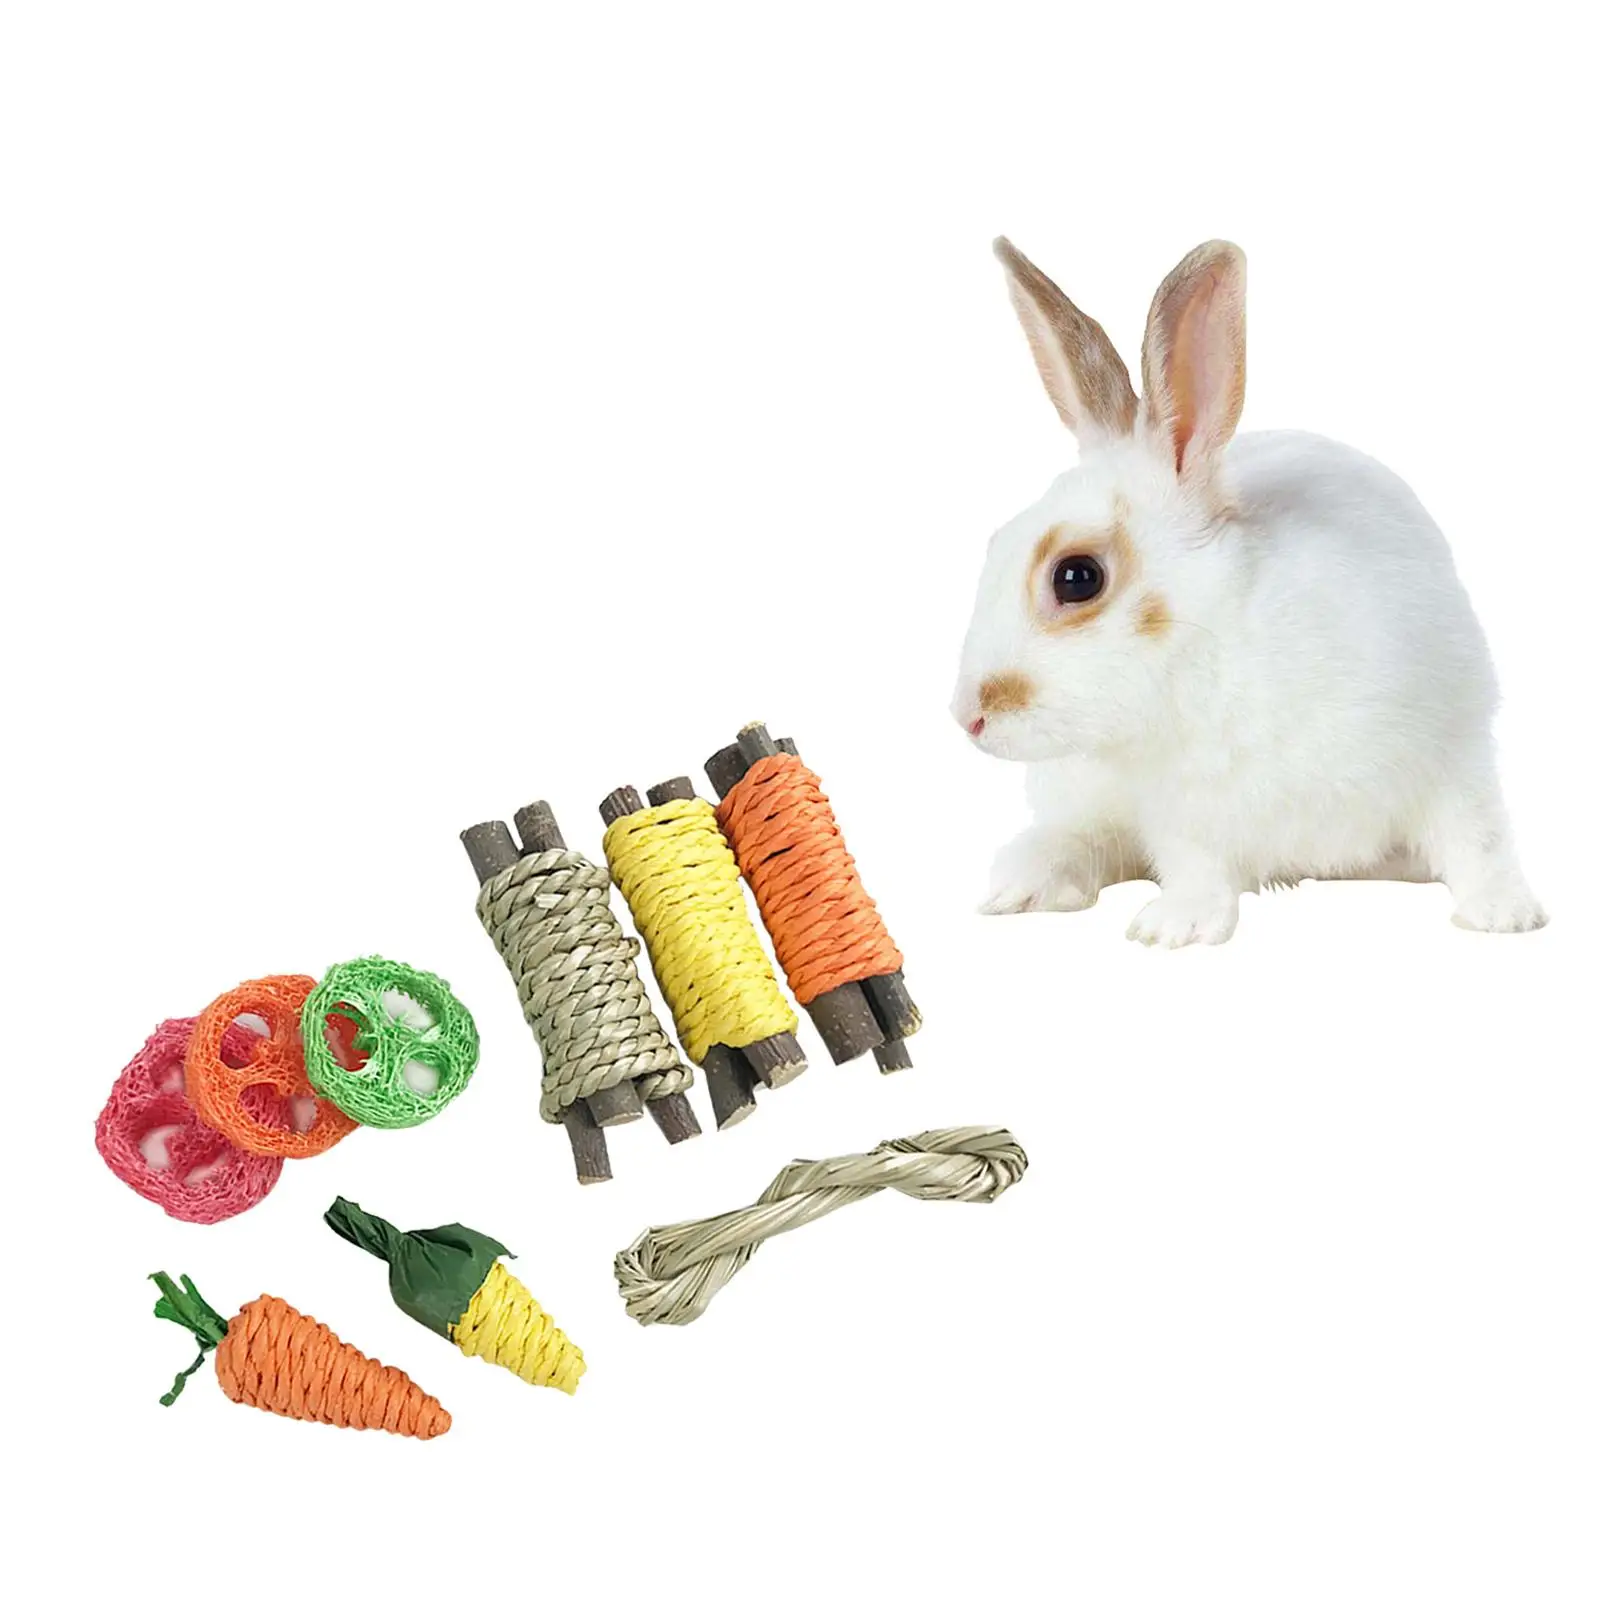 9 Pieces Rabbit Chew Toys Bite Grind  Toy for Guinea Pigs Chinchillas  Cleaning